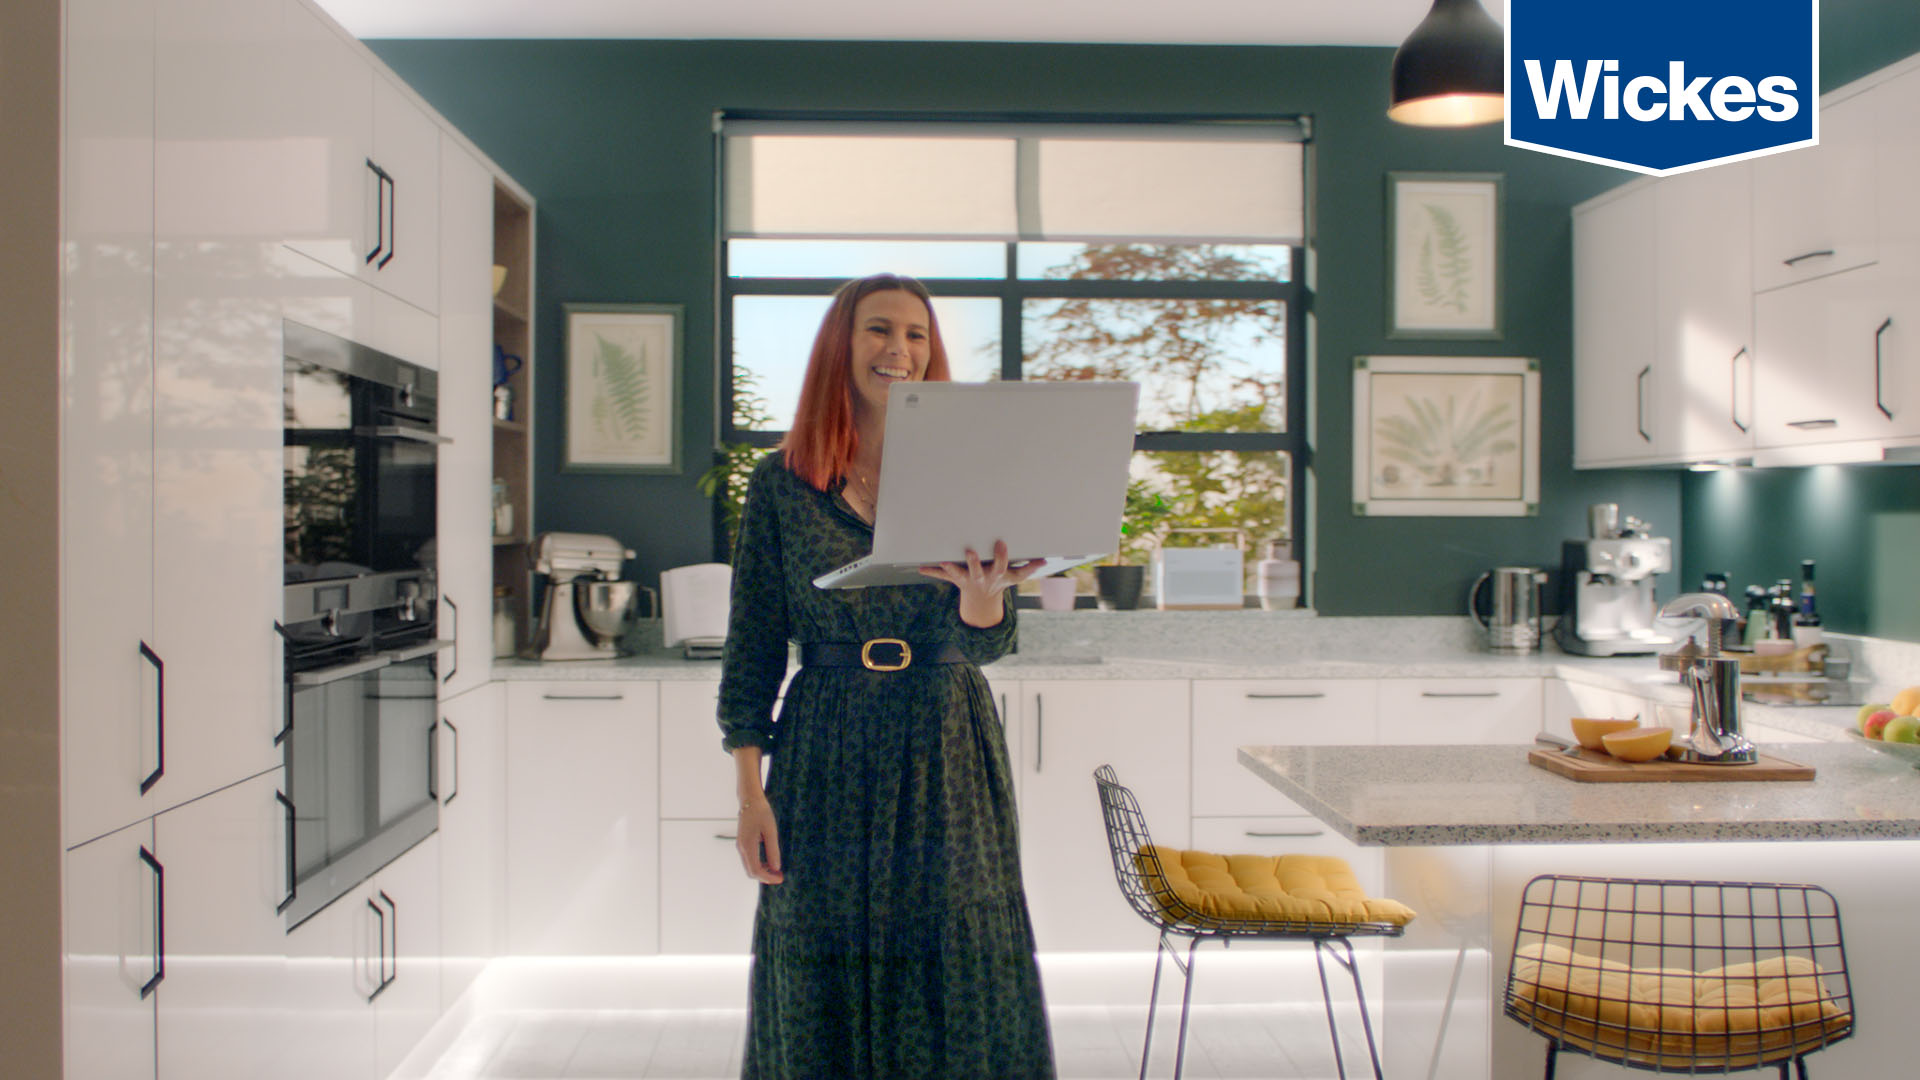 WICKES LATEST ‘HOUSEBARRASSMENT’ CAMPAIGN REFLECTS THE ONGOING CHALLENGES OF WORKING FROM HOME @Wickes